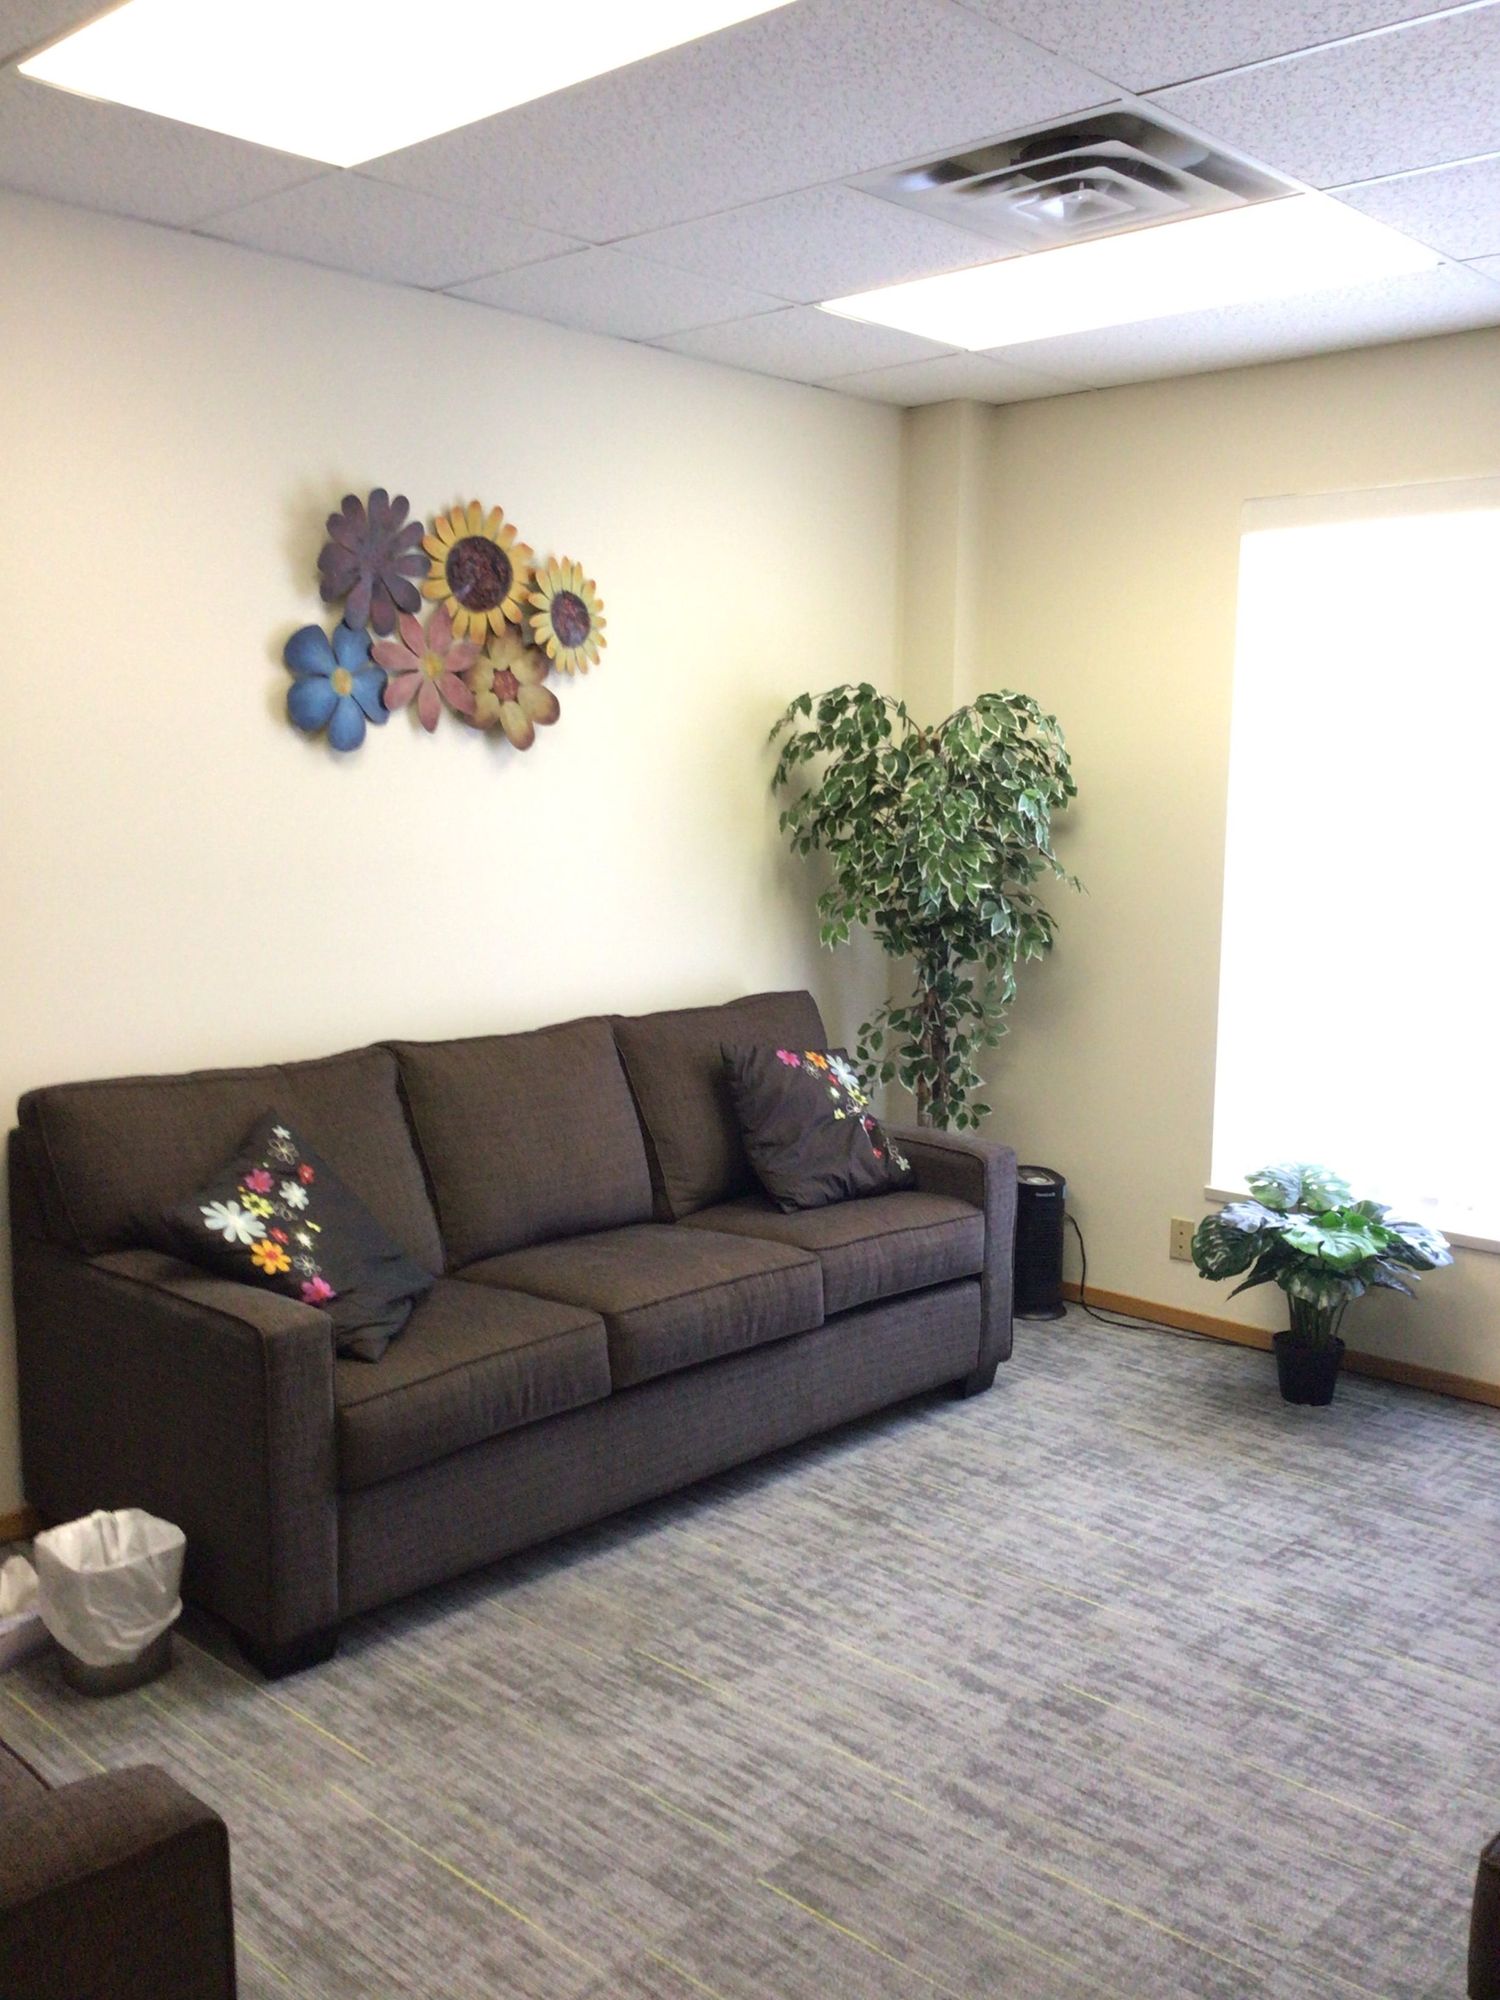 Gallery Photo of Warm and inviting therapy spaces.